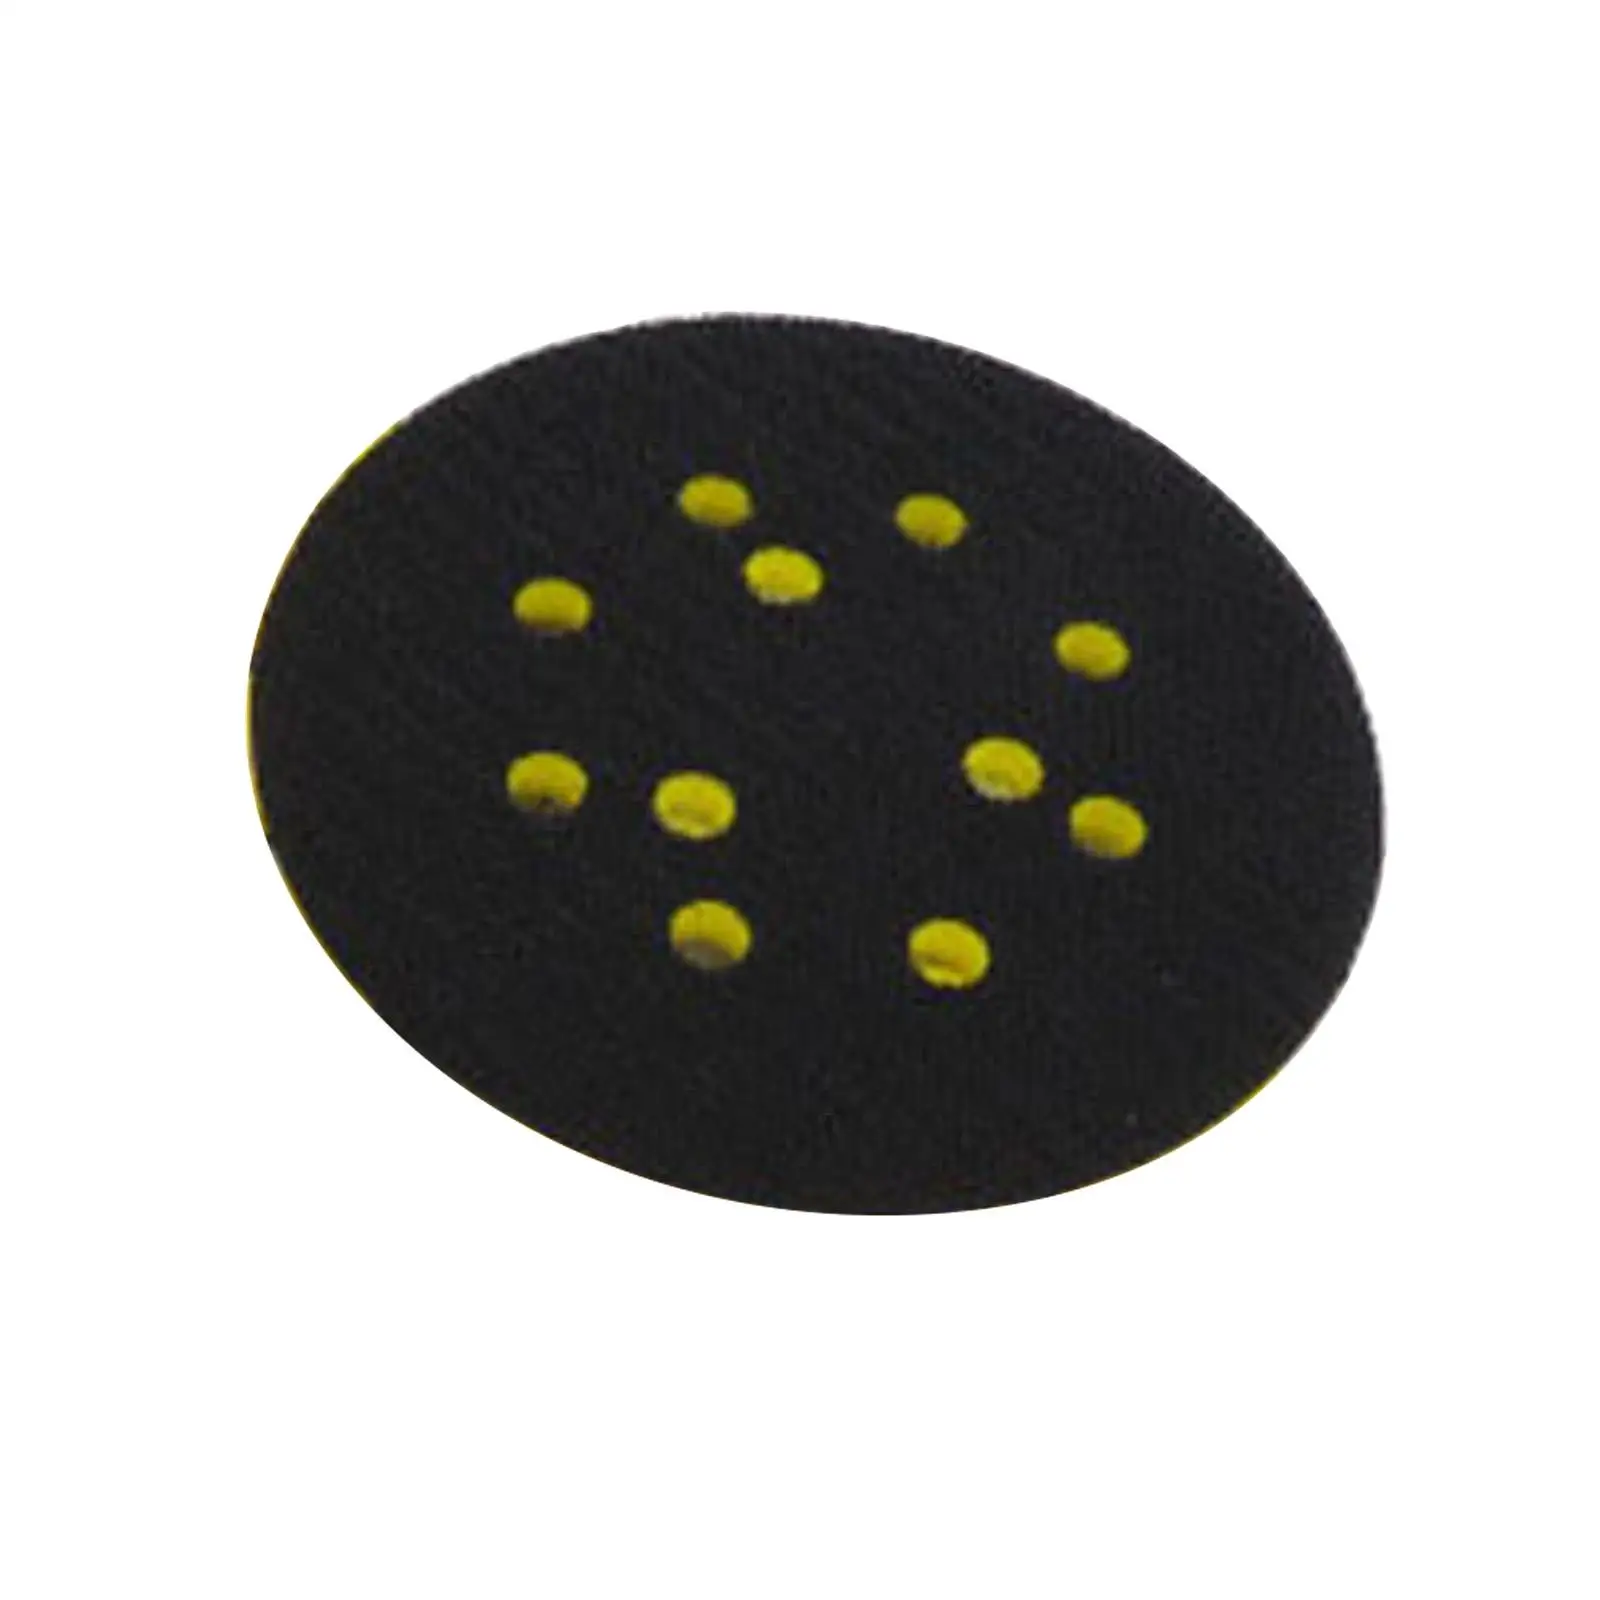 5 inch 125mm Sanding Disc Pad Accs Hook Loop Backer Pads Replace Part Ventilation Durable Grinding Plates for Carving Polisher